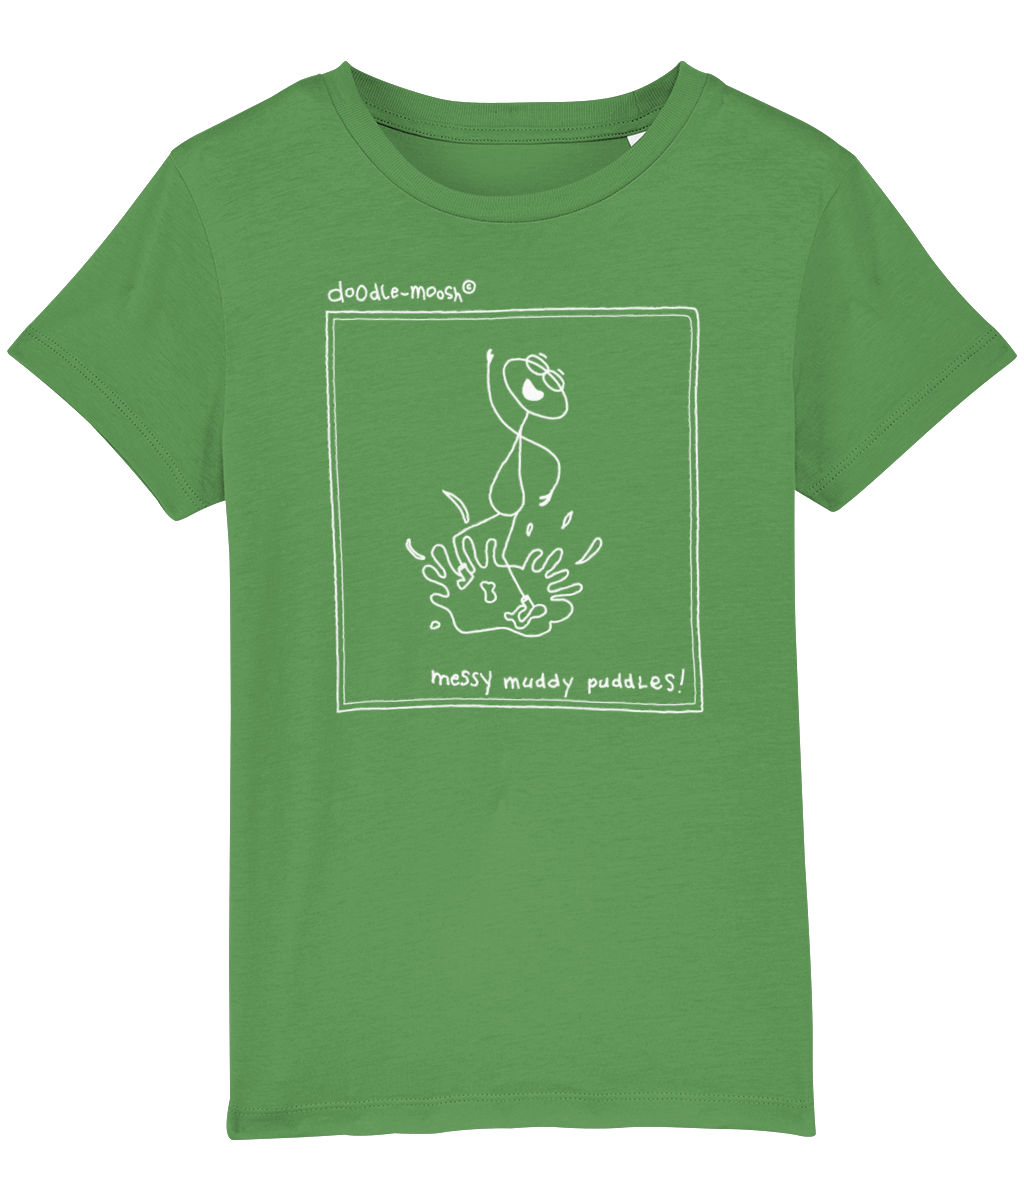 Messy muddy puddles t-shirt, green with white